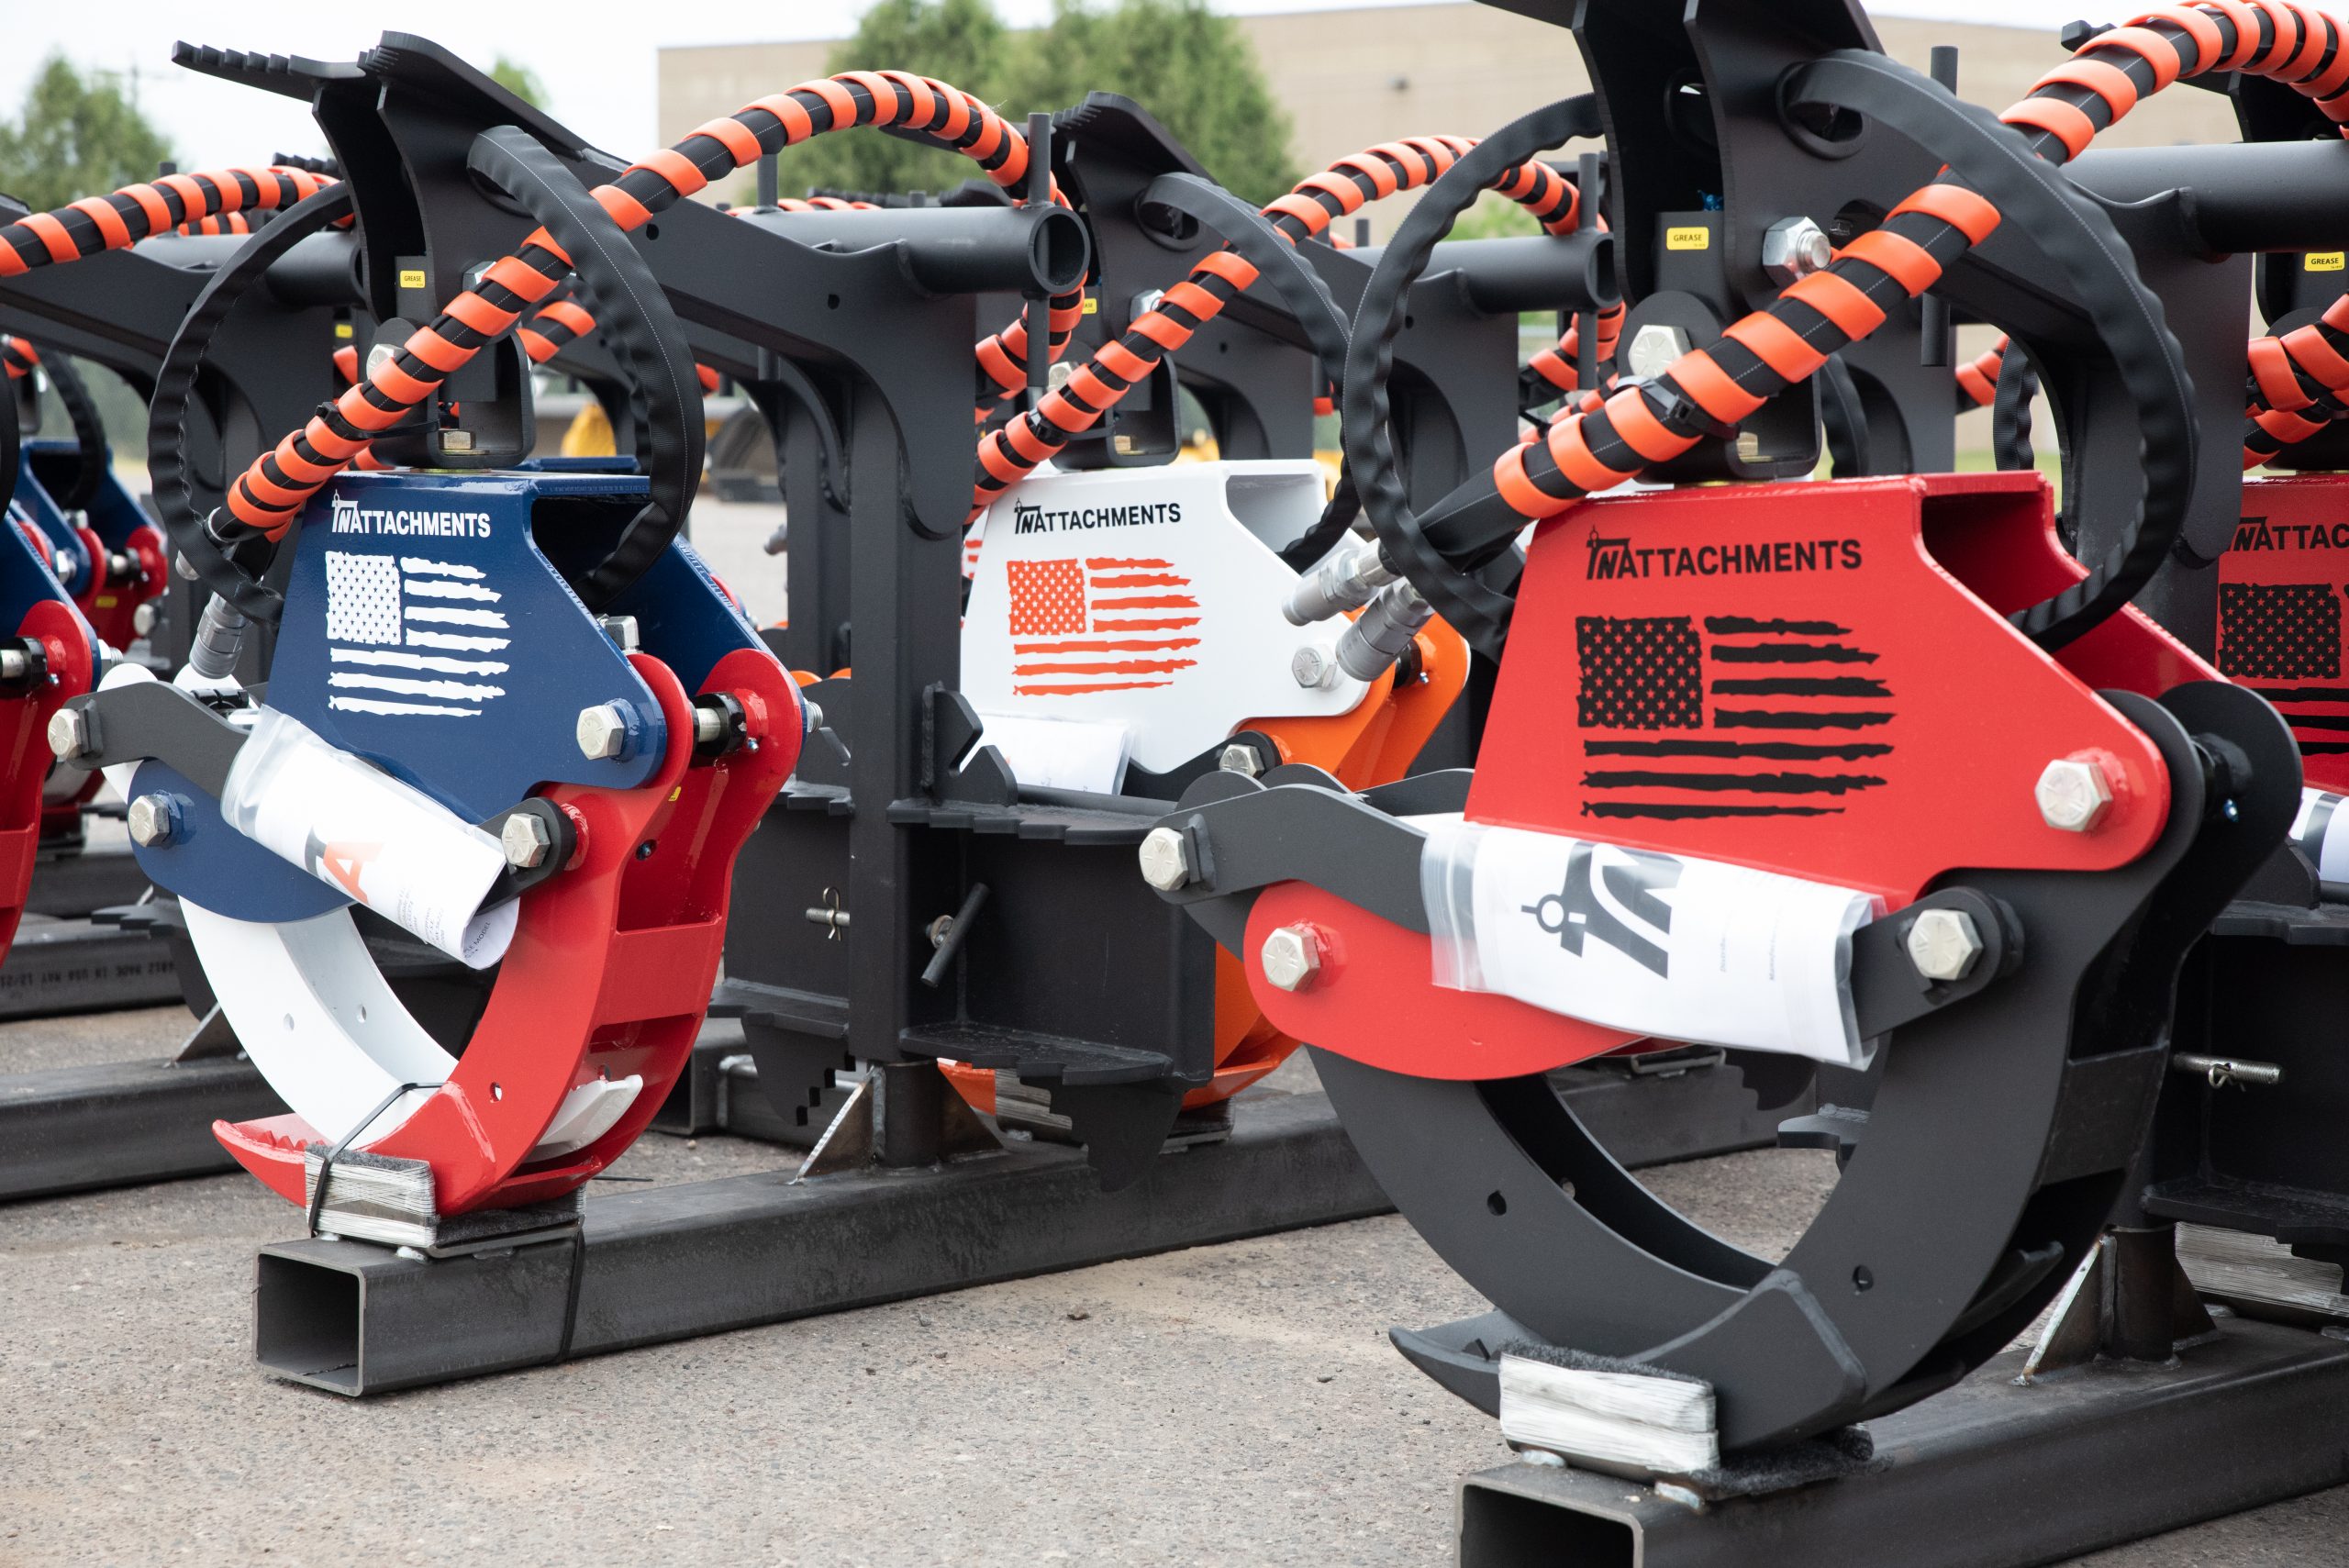 TNAttachments Grapples come in custom color ways to match your equipment! Red, White, Blue, Orange, Black.3 Ton Power Rotation 61" Grapple Opening Internal Hose Routing High Strength 3/8" Steel Body, Transfer & Grapple Arms (AR400) 2.5" Hydraulic Cylinder Integrated Whale Tail Tree Pusher Angled Hanger With Fully Welded Side Gussets Large Integrated Rope Bollard Available in Universal Mini, MT, FSS & HD-Euro (Avant, MultiOne) Attachment Plates Optional Receiver Hitch & 1 Piece Milled Saw Scabbards. Custom Color Options To Match Your Loader